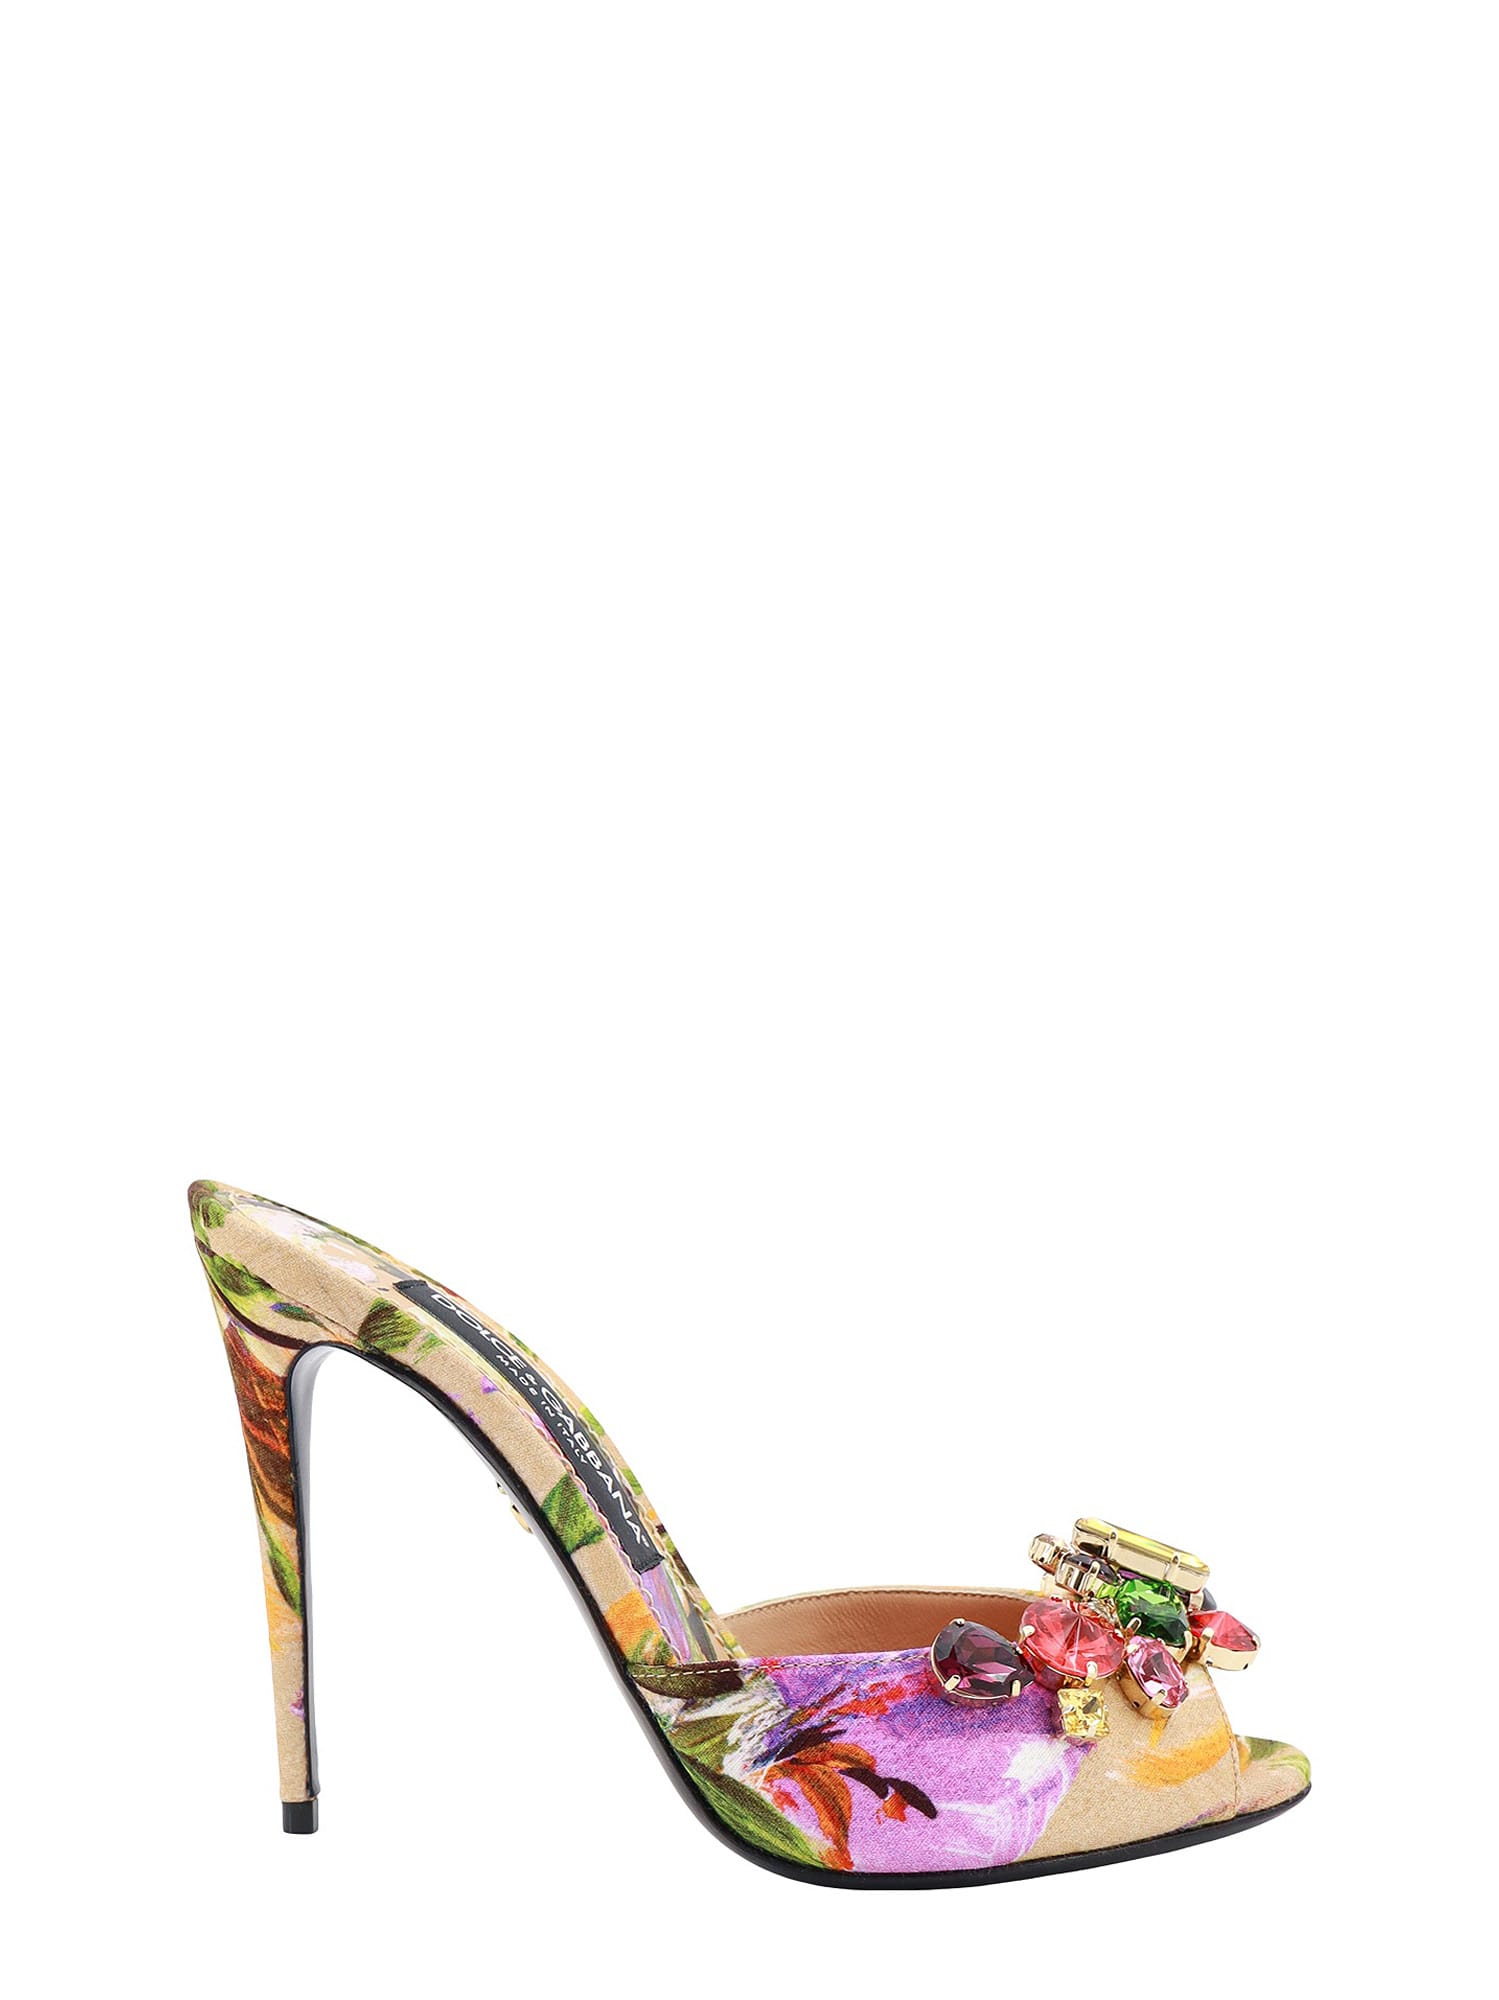 Fabric Sandals With Floral Motif